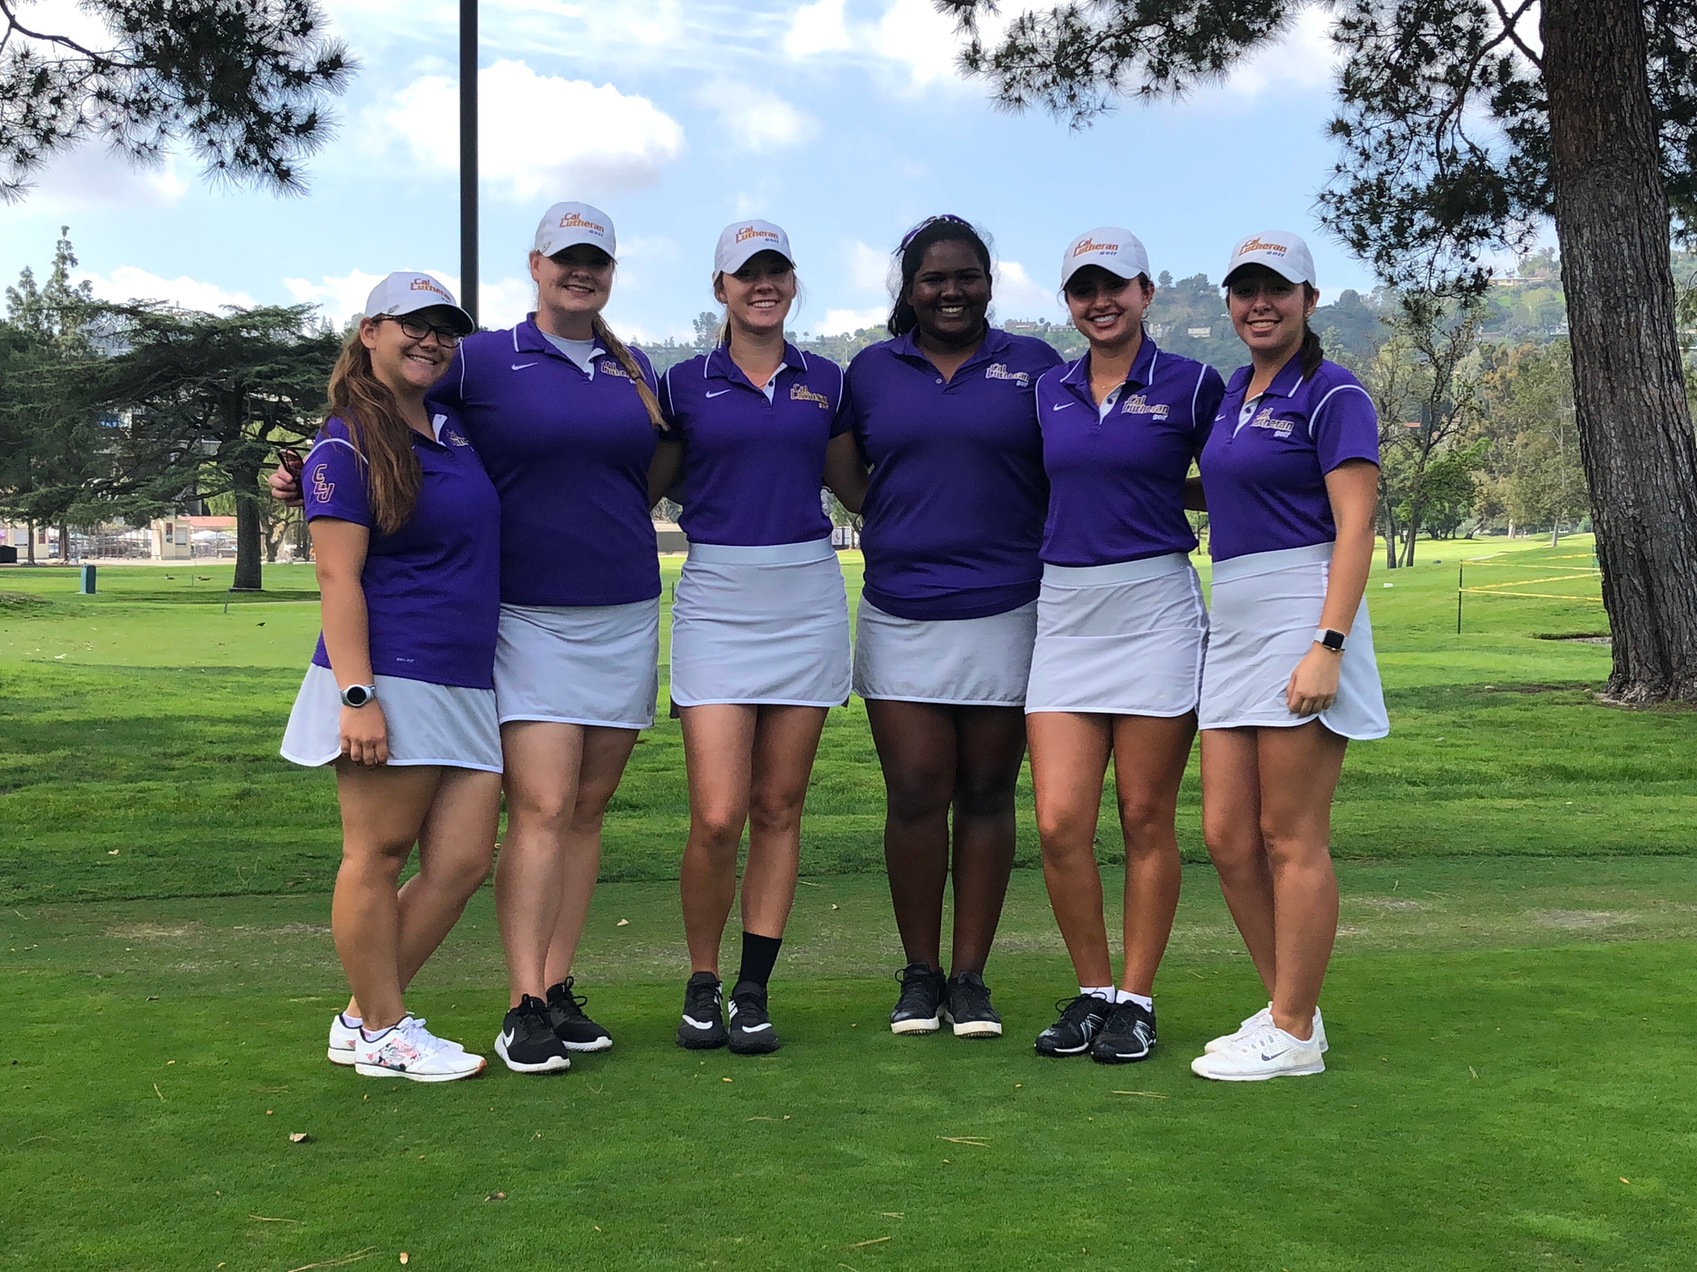 Regals Golf Take Fourth, McCardell and Gaskill Place Top-10